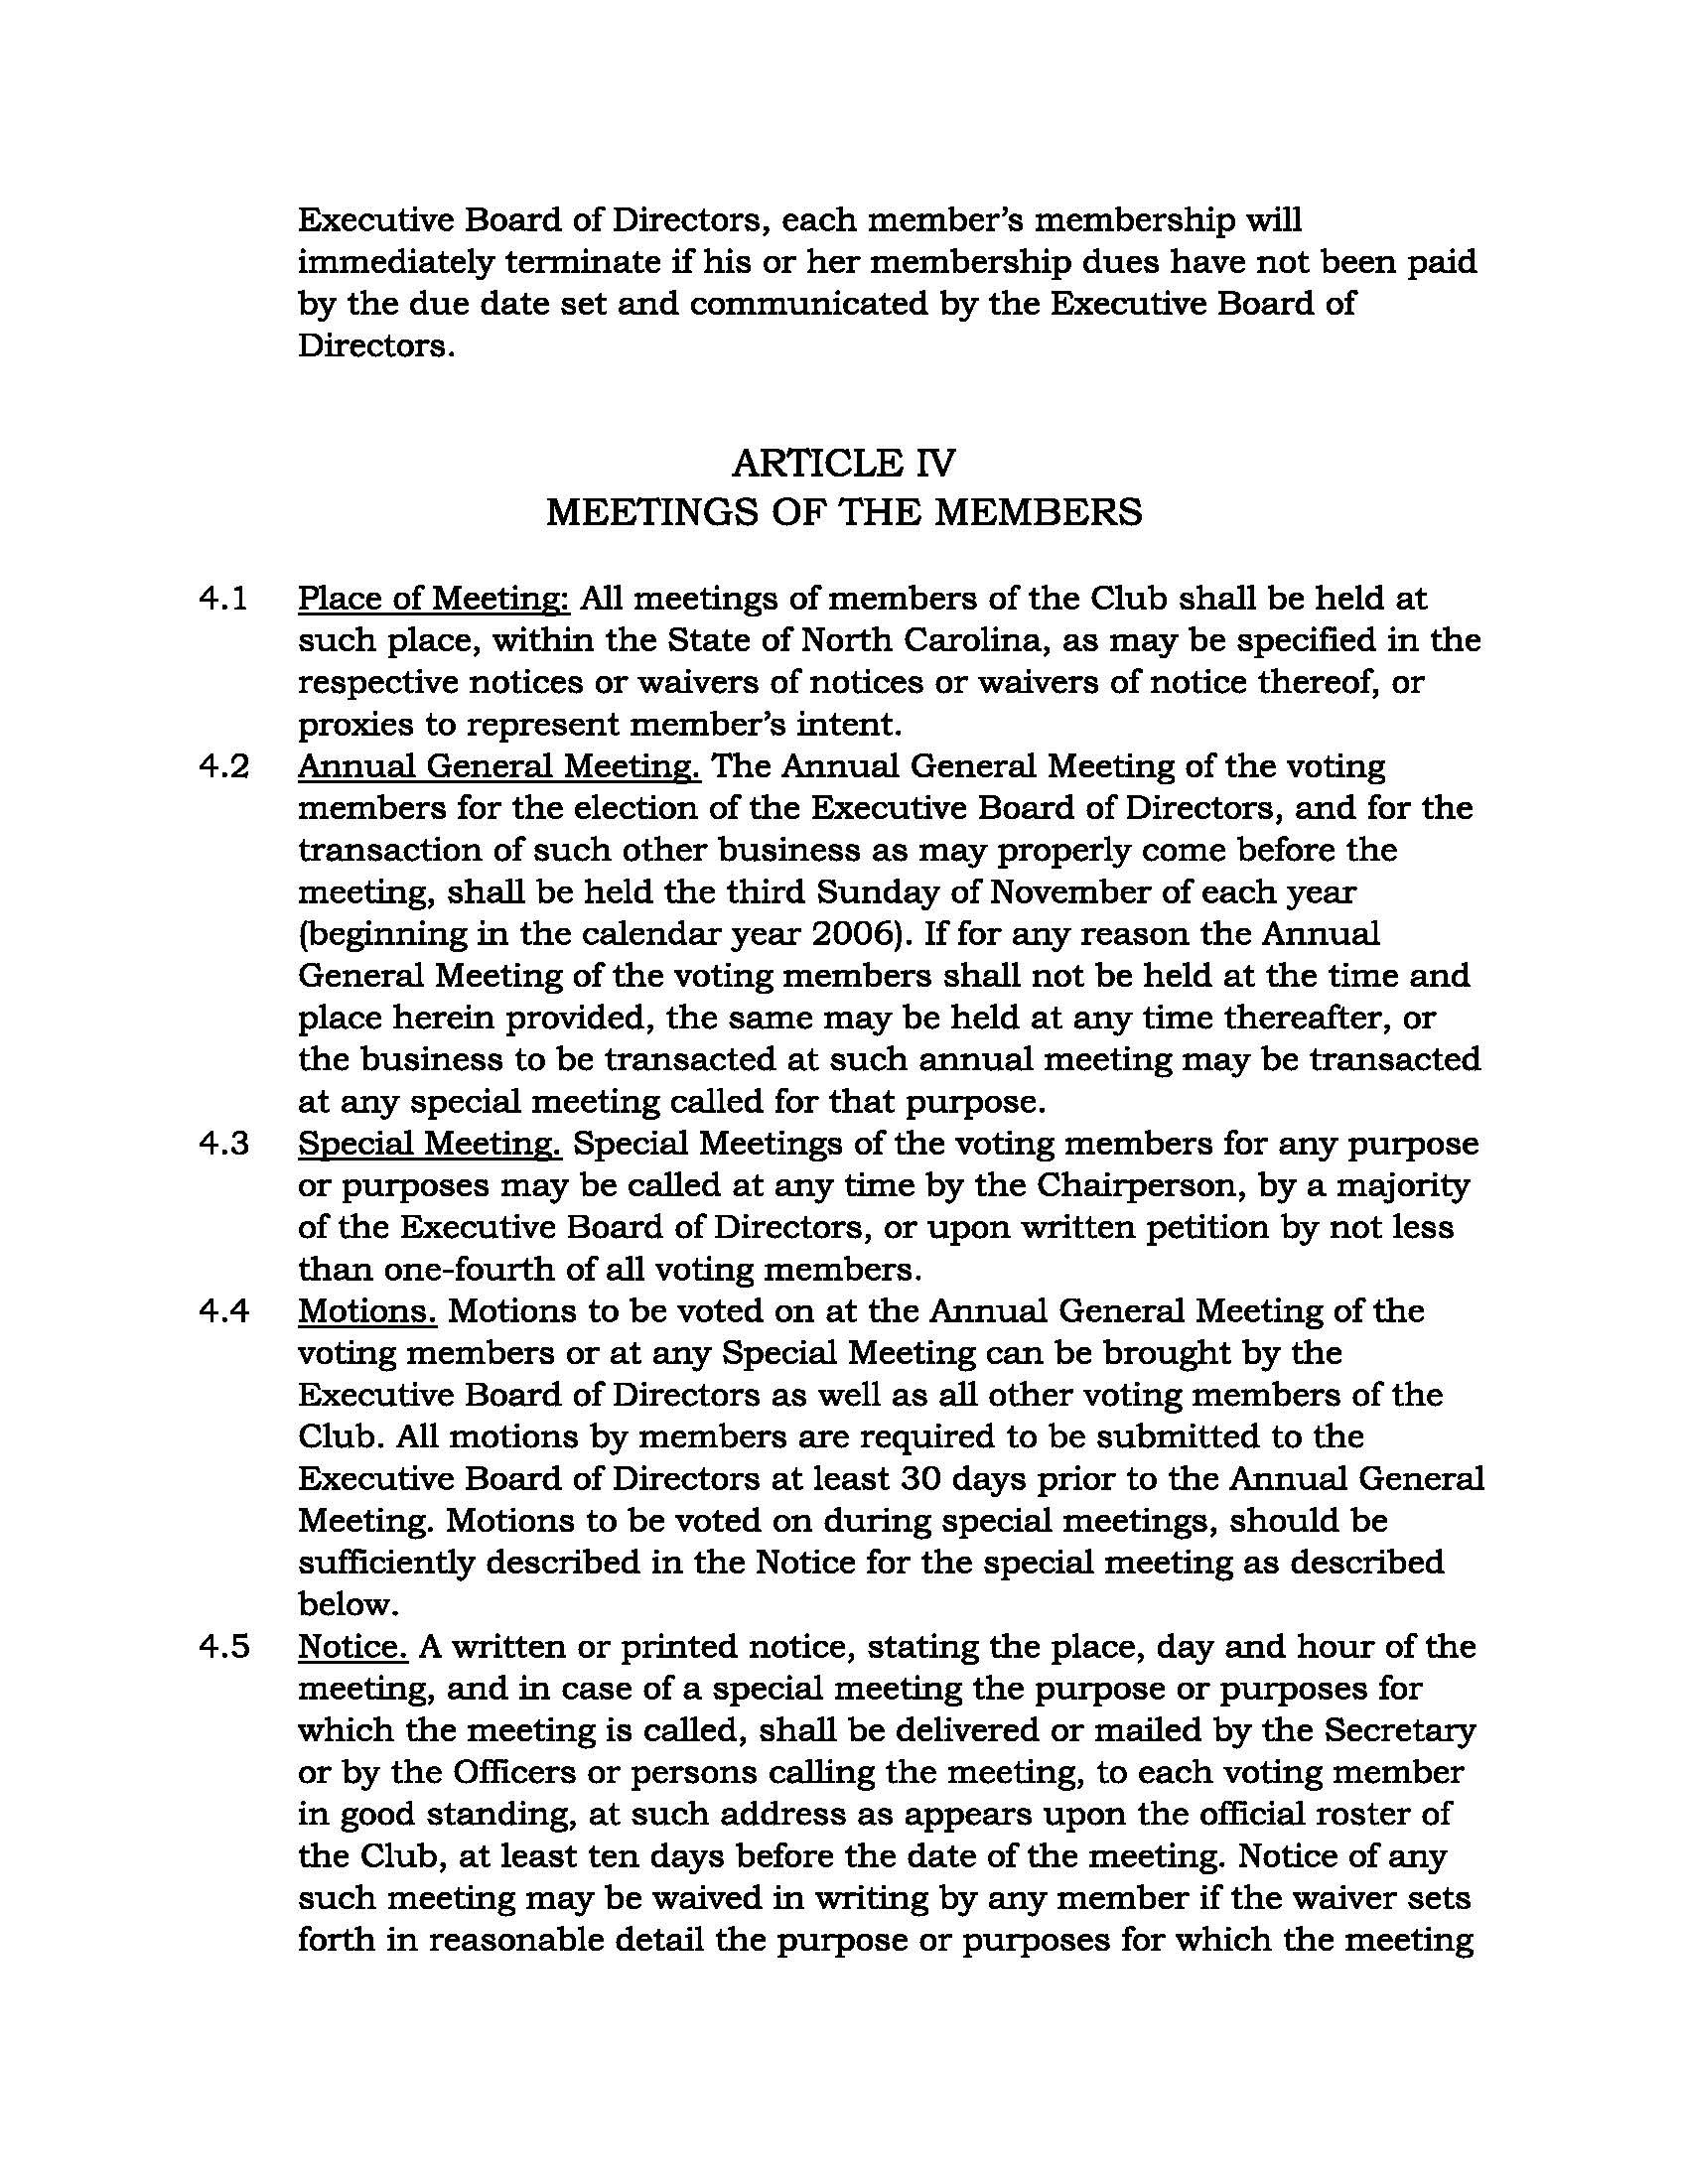 Bylaws of Charlotte James Connolly Gaelic Football Club_11.21.2022 - Signed_Page_05.jpg